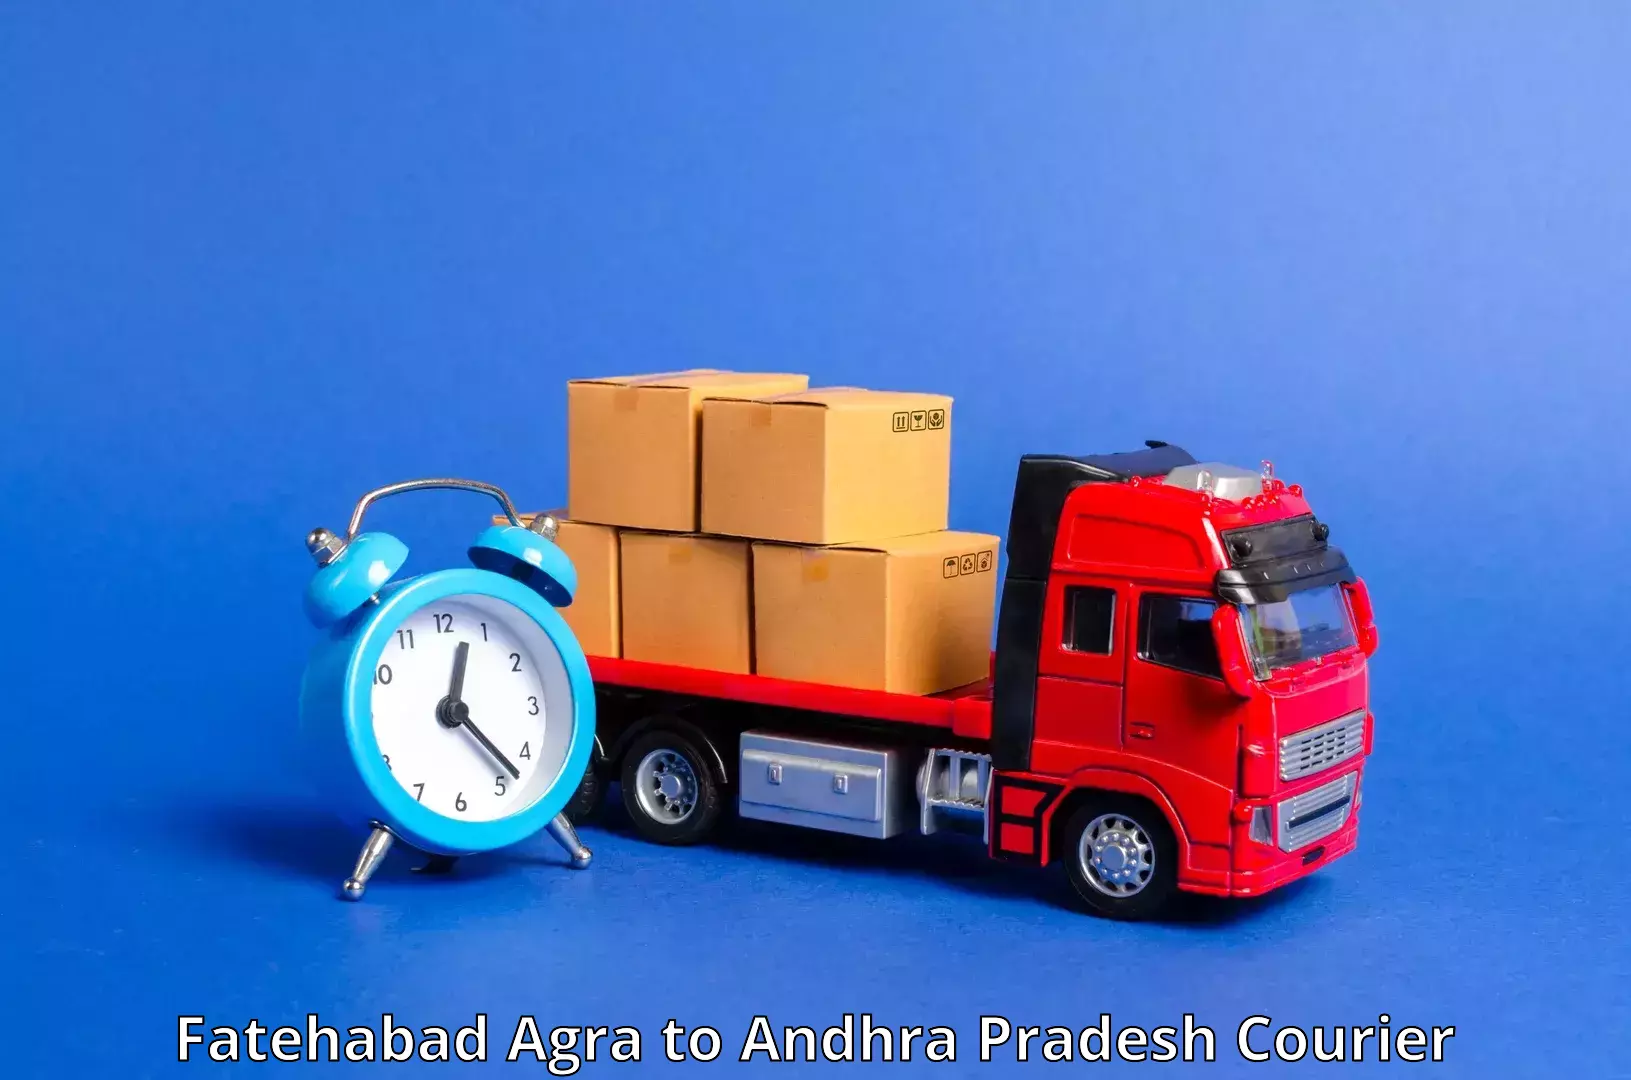 Round-the-clock parcel delivery Fatehabad Agra to Kanigiri